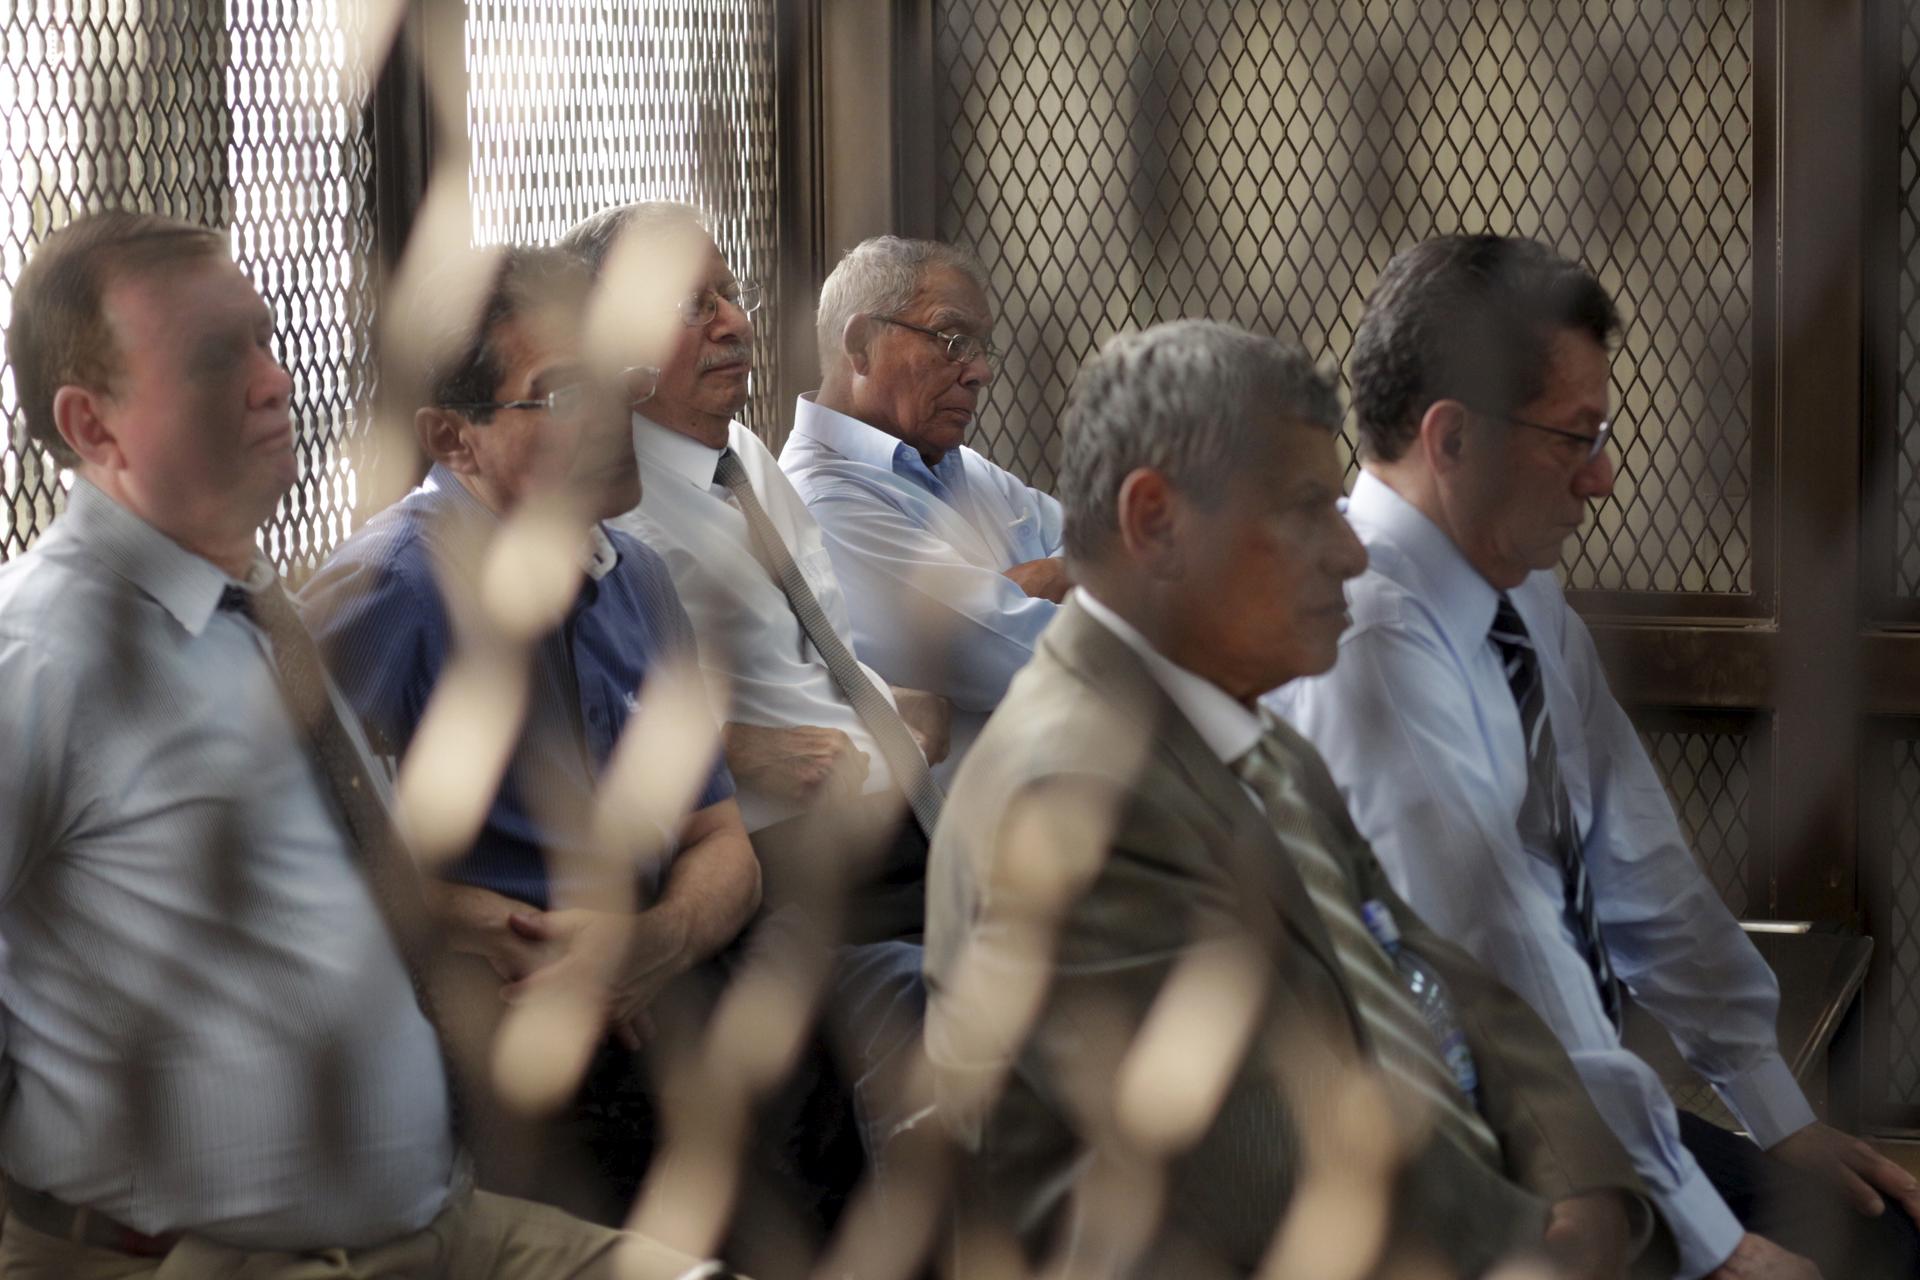 Retired military officers, from left, Luis Alberto Paredes, Byron Humberto Barrientos, Ismael Segura Abularach, Benedicto Lucas, Gustavo Alonzo Rosales and Carlos Augusto Garavito sit in a cage